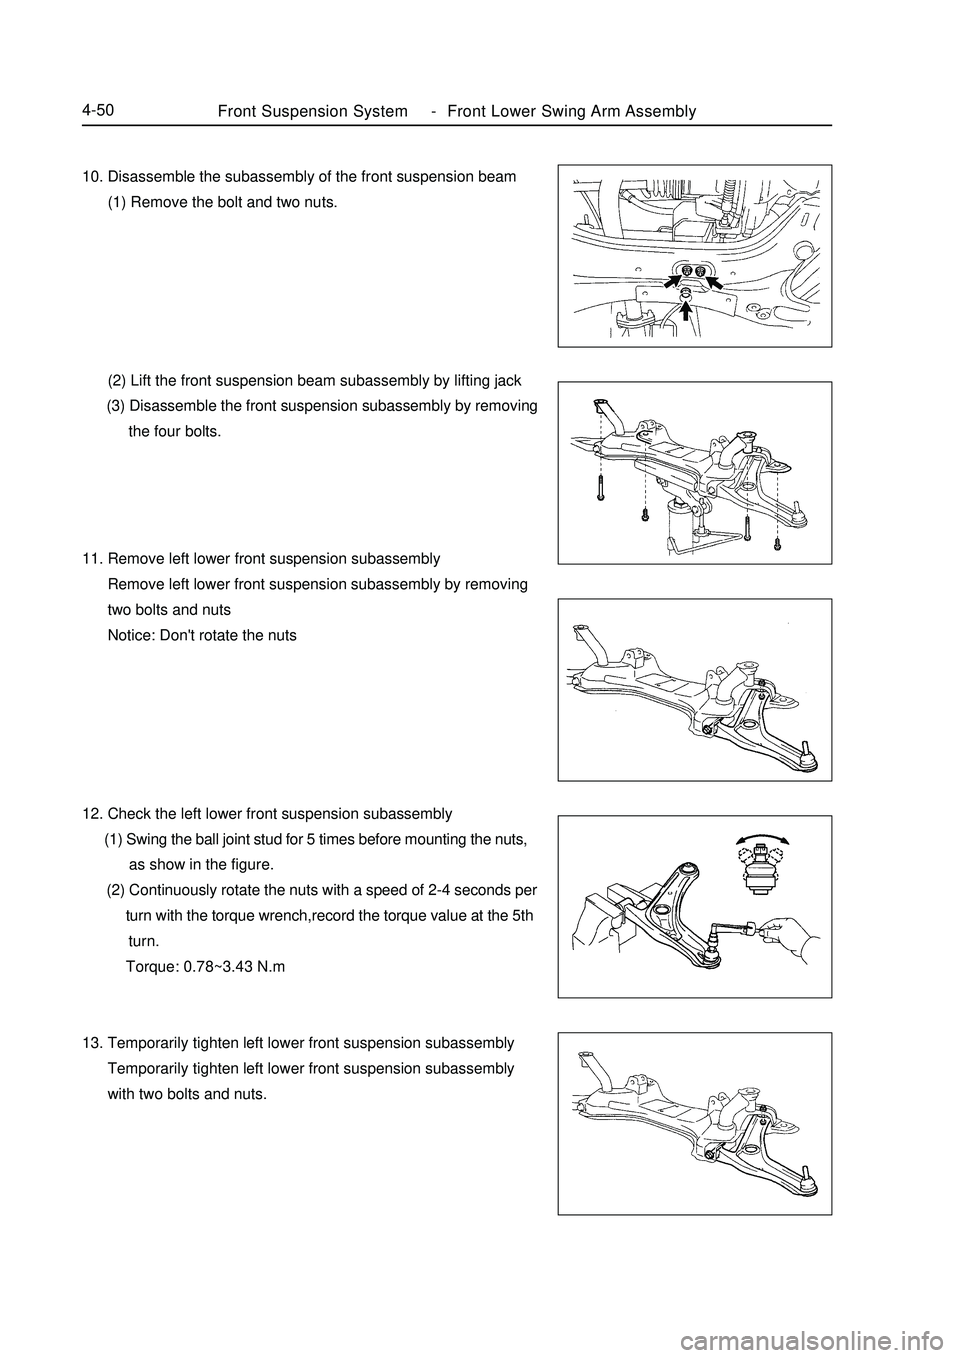 GEELY MK 2008  Workshop Manual Front Suspension System-Front Lower Swing Arm Assembly4-5010. Disassemble the subassembly of the front suspension beam
      (1) Remove the bolt and two nuts.
      (2) Lift the front suspension beam 